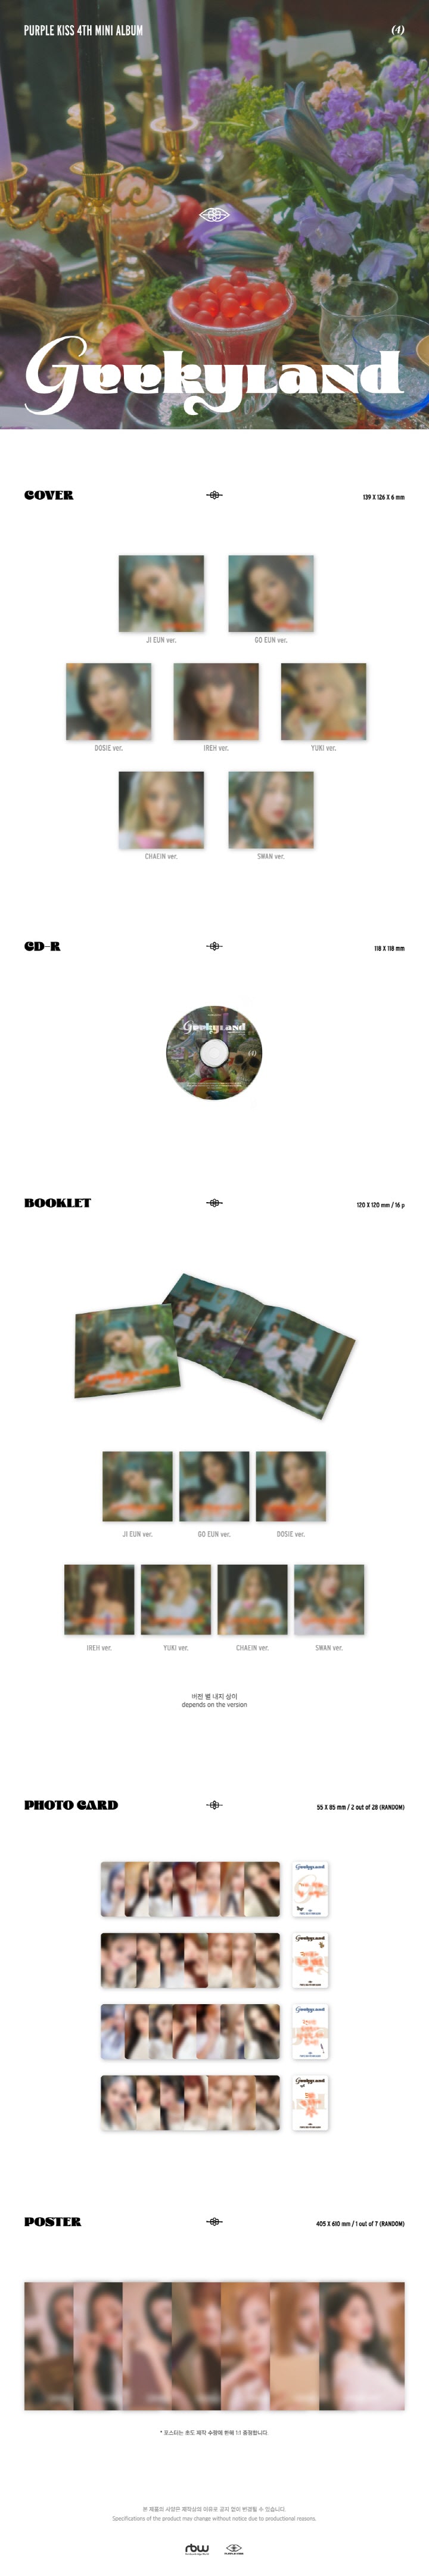 1 CD
1 Booklet (16 pages)
2 Photo Cards (random out of 28 types)